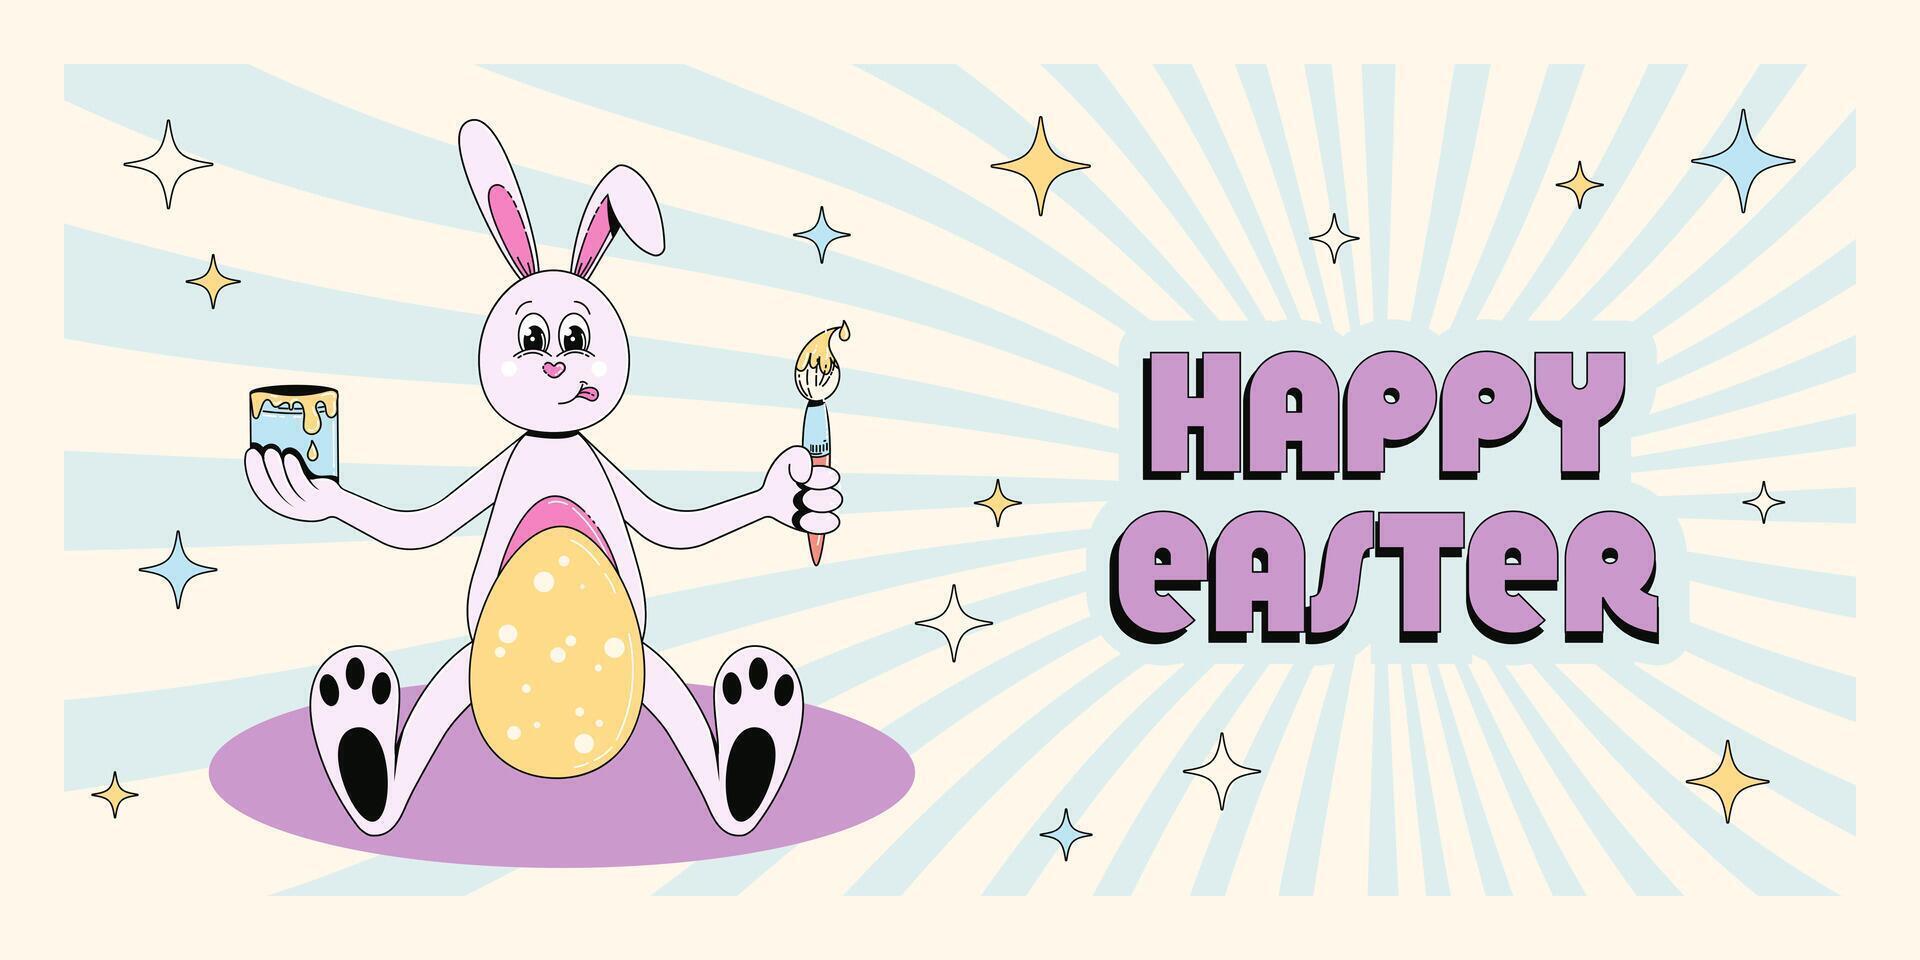 Groovy hippie Happy Easter banner, background, poster. Easter bunny paint eggs, greeting text. Vector illustration of cartoon character and typography in trendy retro 60s 70s style.